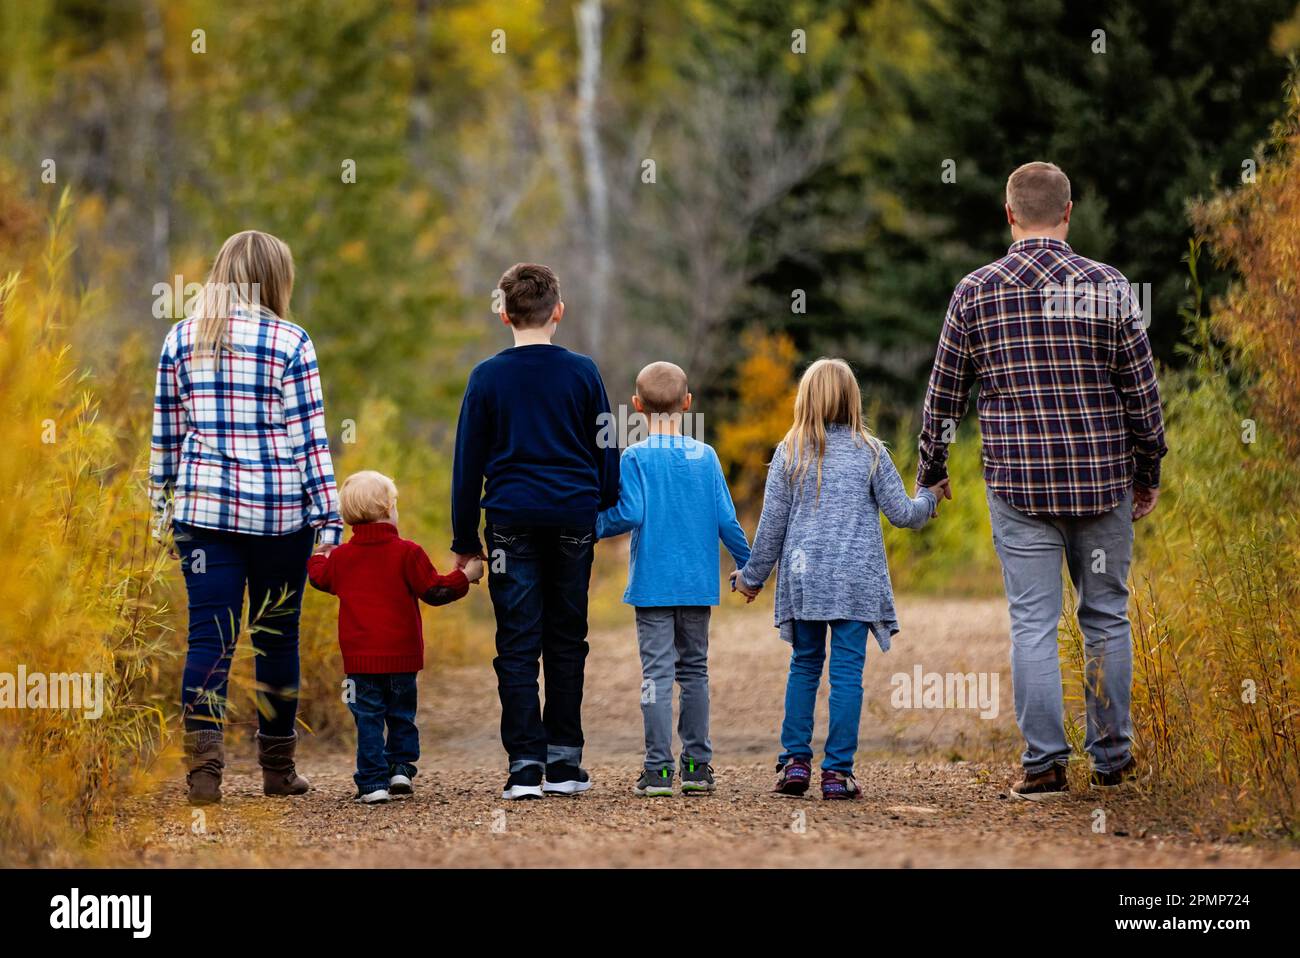 Family of six walking together hand in hand in a park in autumn; Edmonton, Alberta, Canada Stock Photo